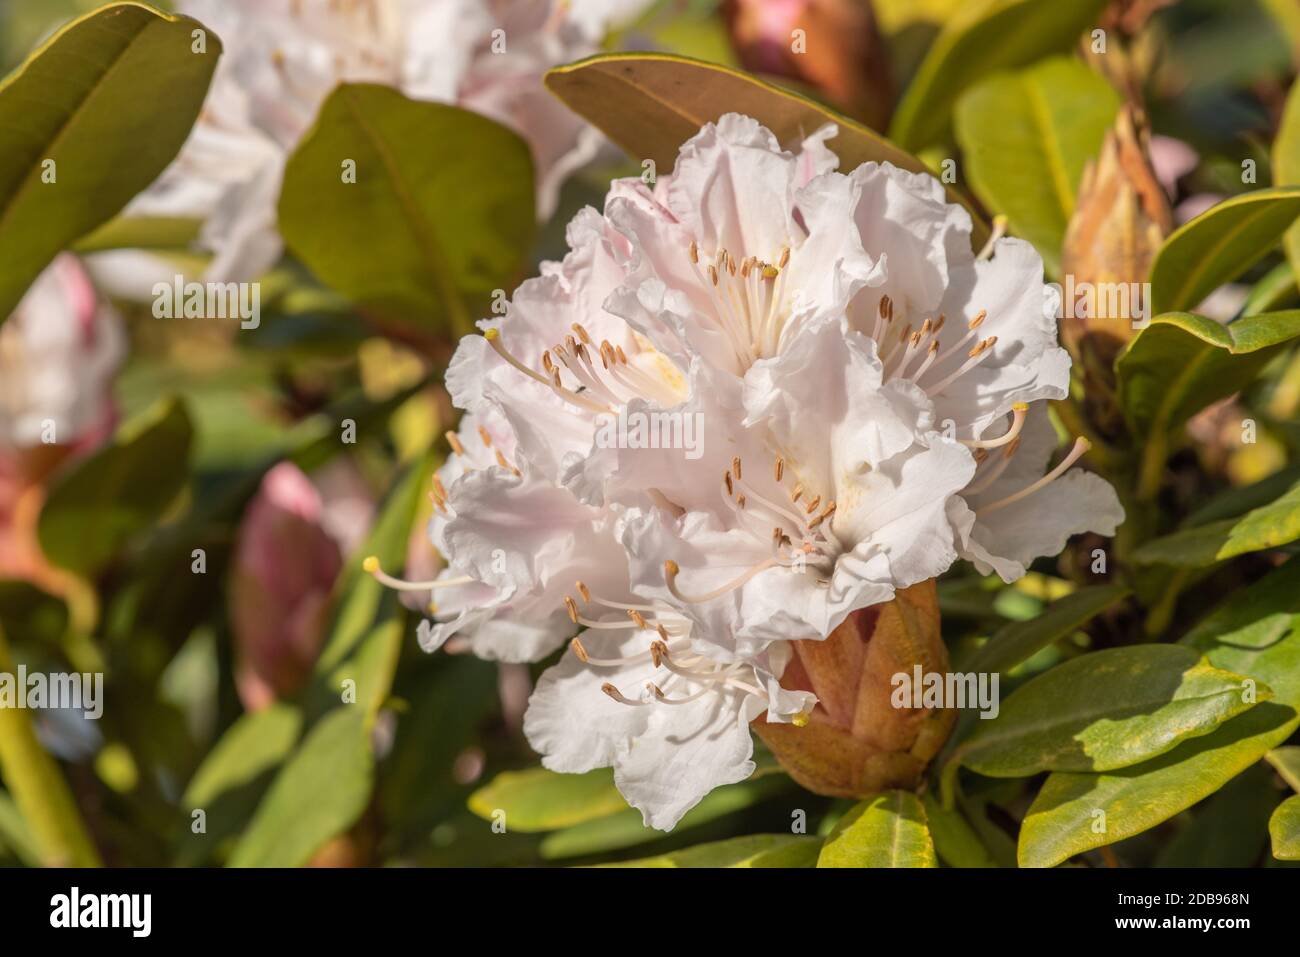 Rhododendron flower Stock Photo